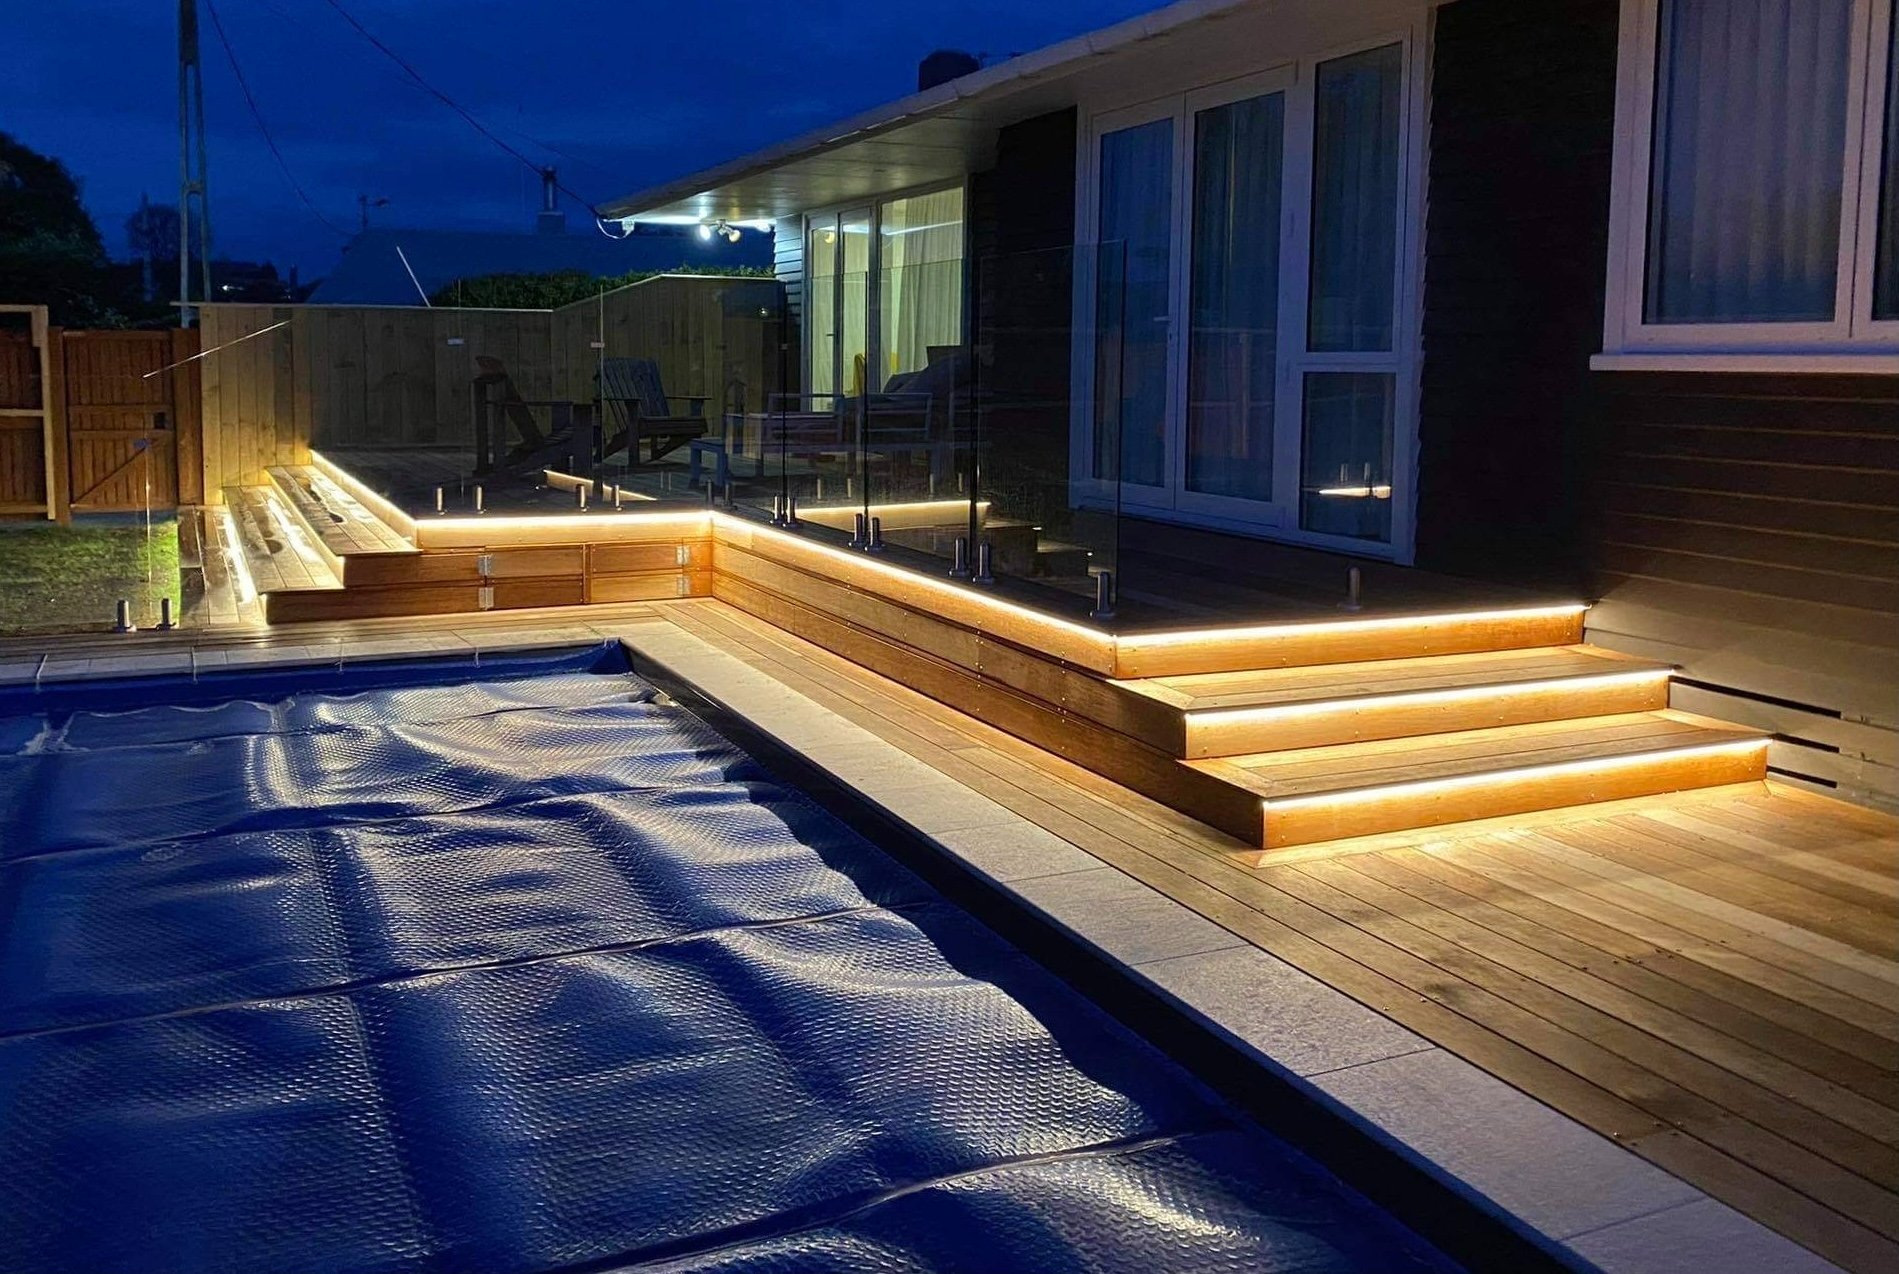  Exterior LED lighting and pool landscaping.  